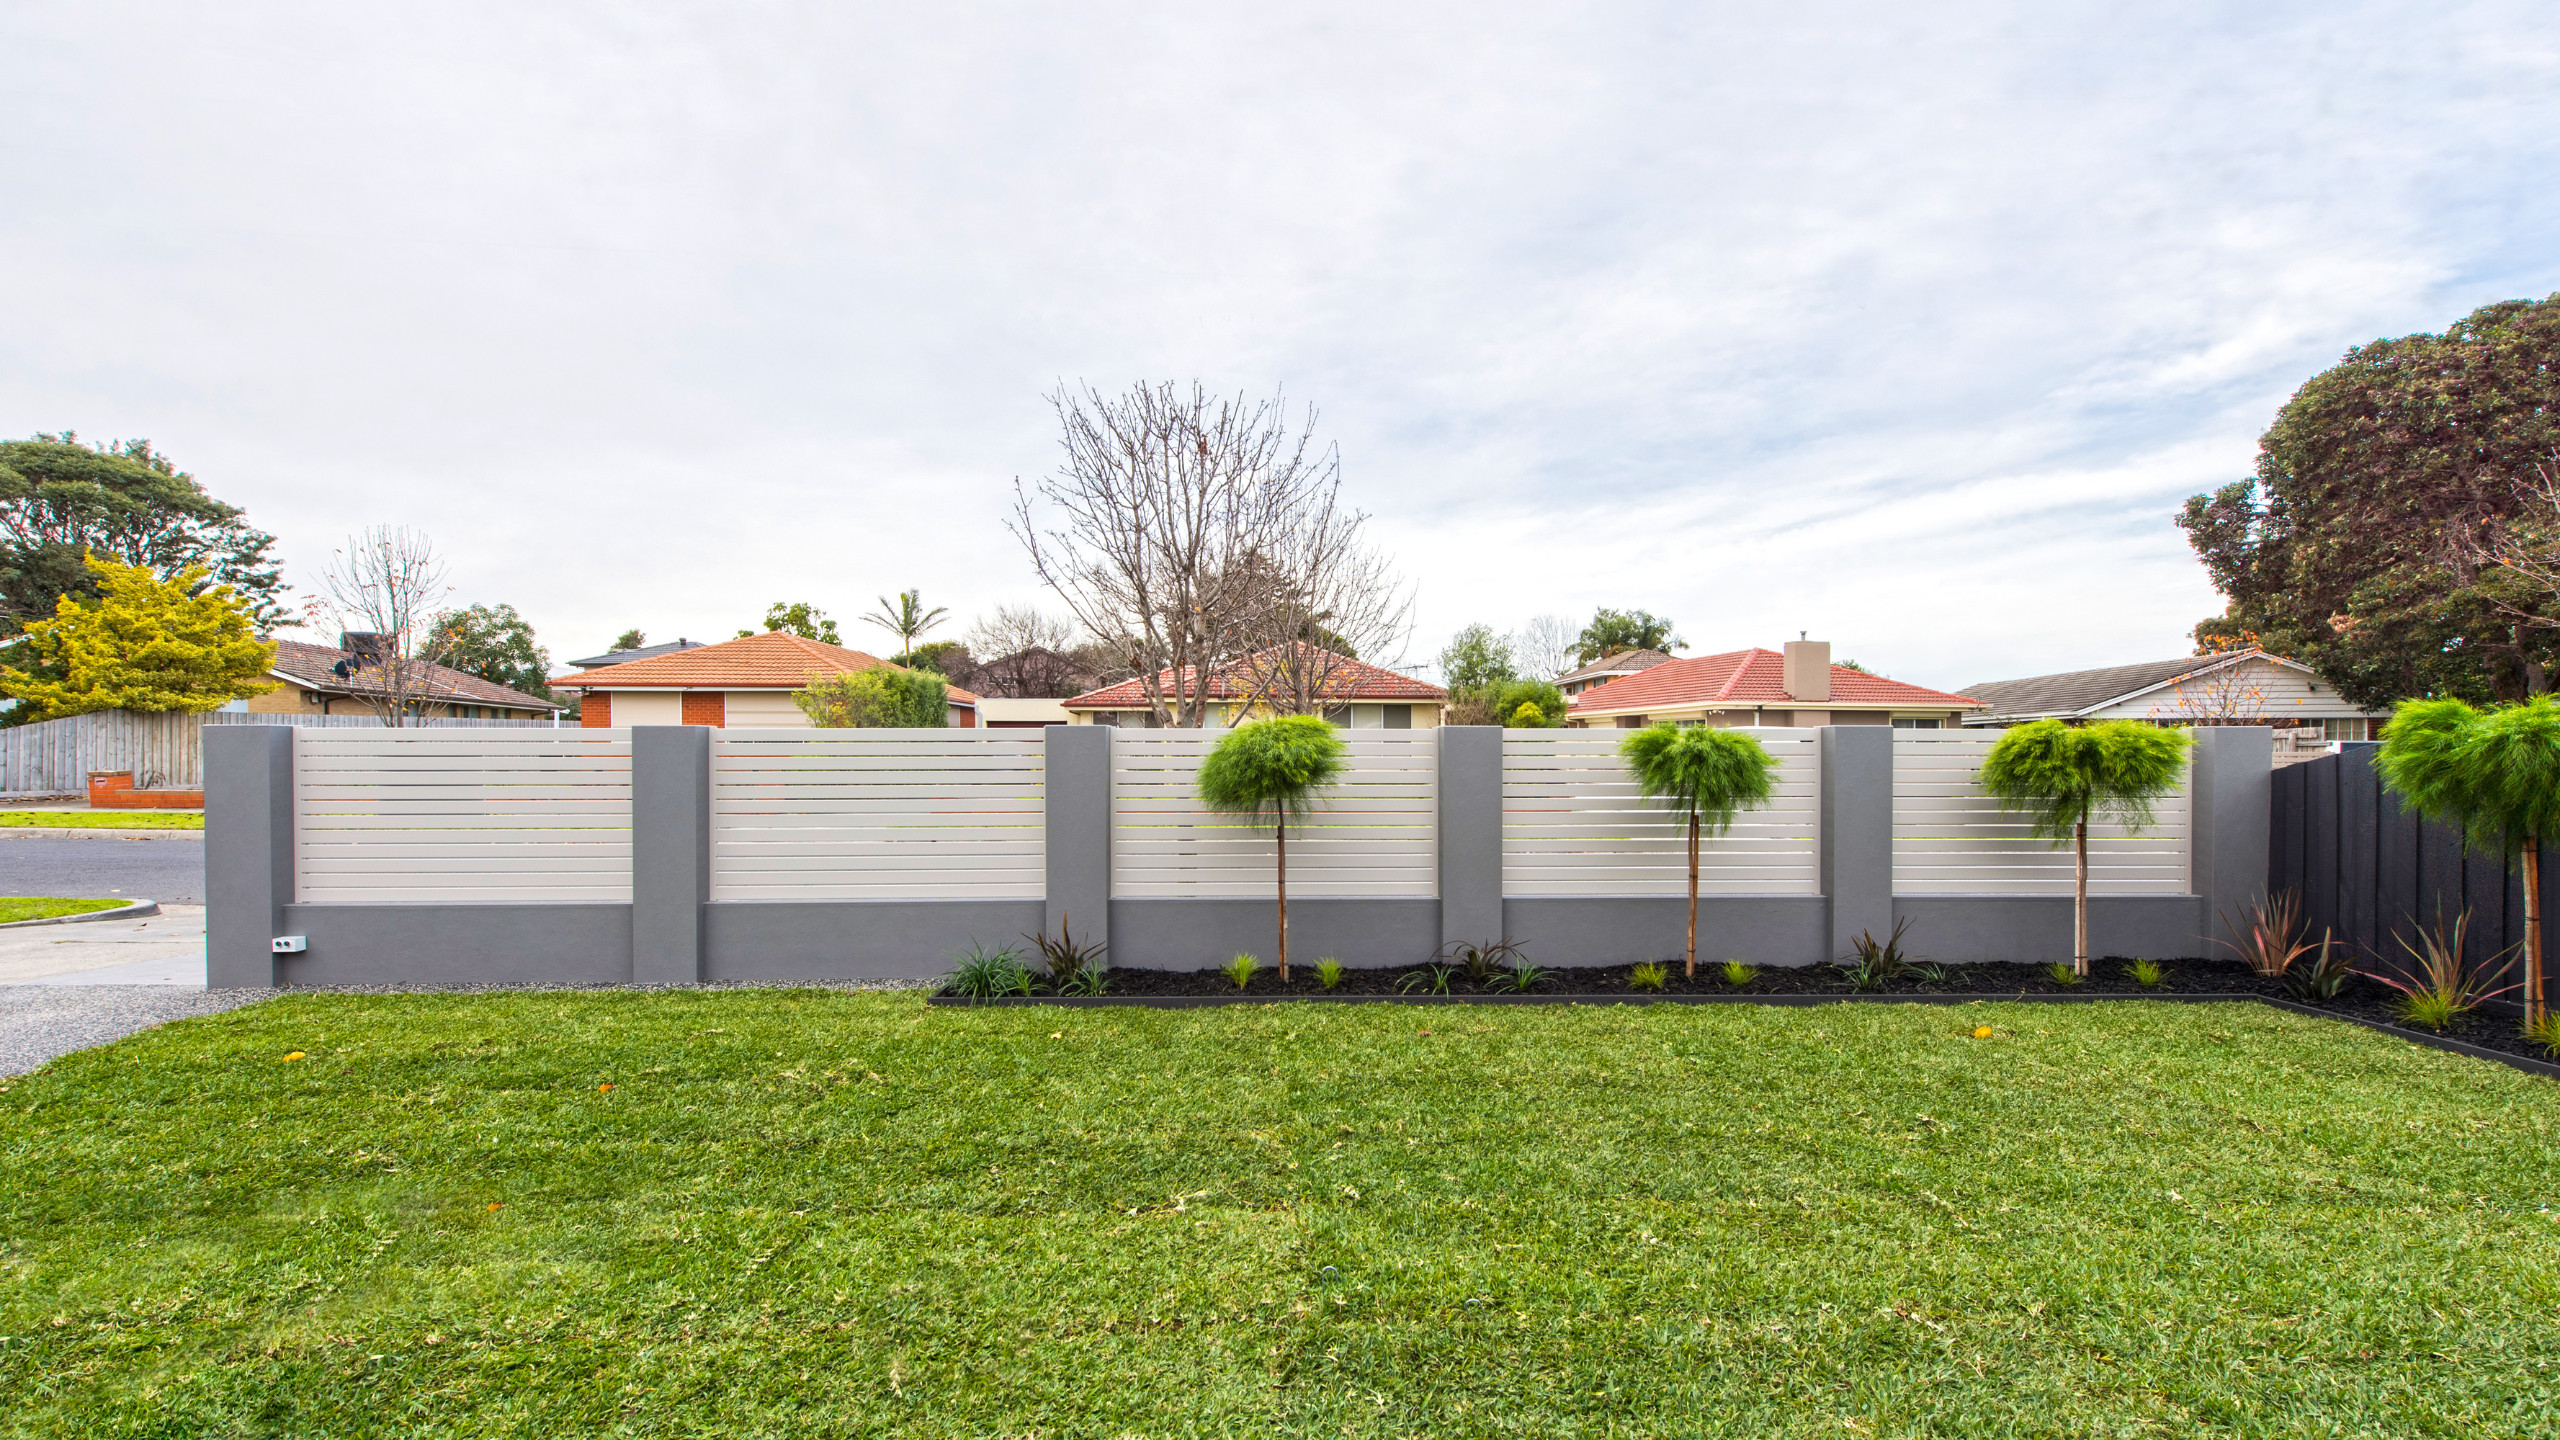 DIY front wall saves hassle and cost of council approval